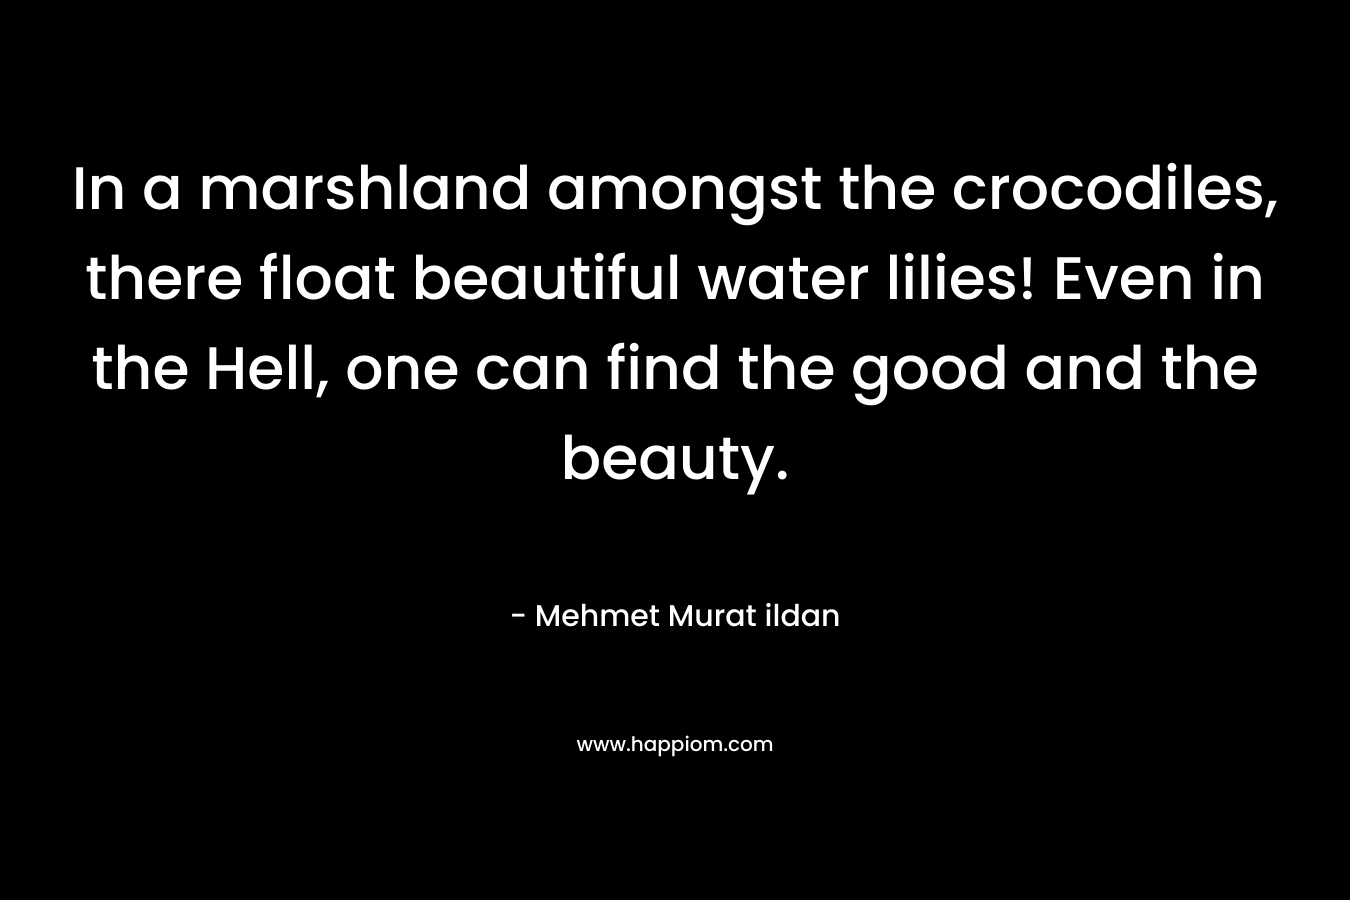 In a marshland amongst the crocodiles, there float beautiful water lilies! Even in the Hell, one can find the good and the beauty. – Mehmet Murat ildan